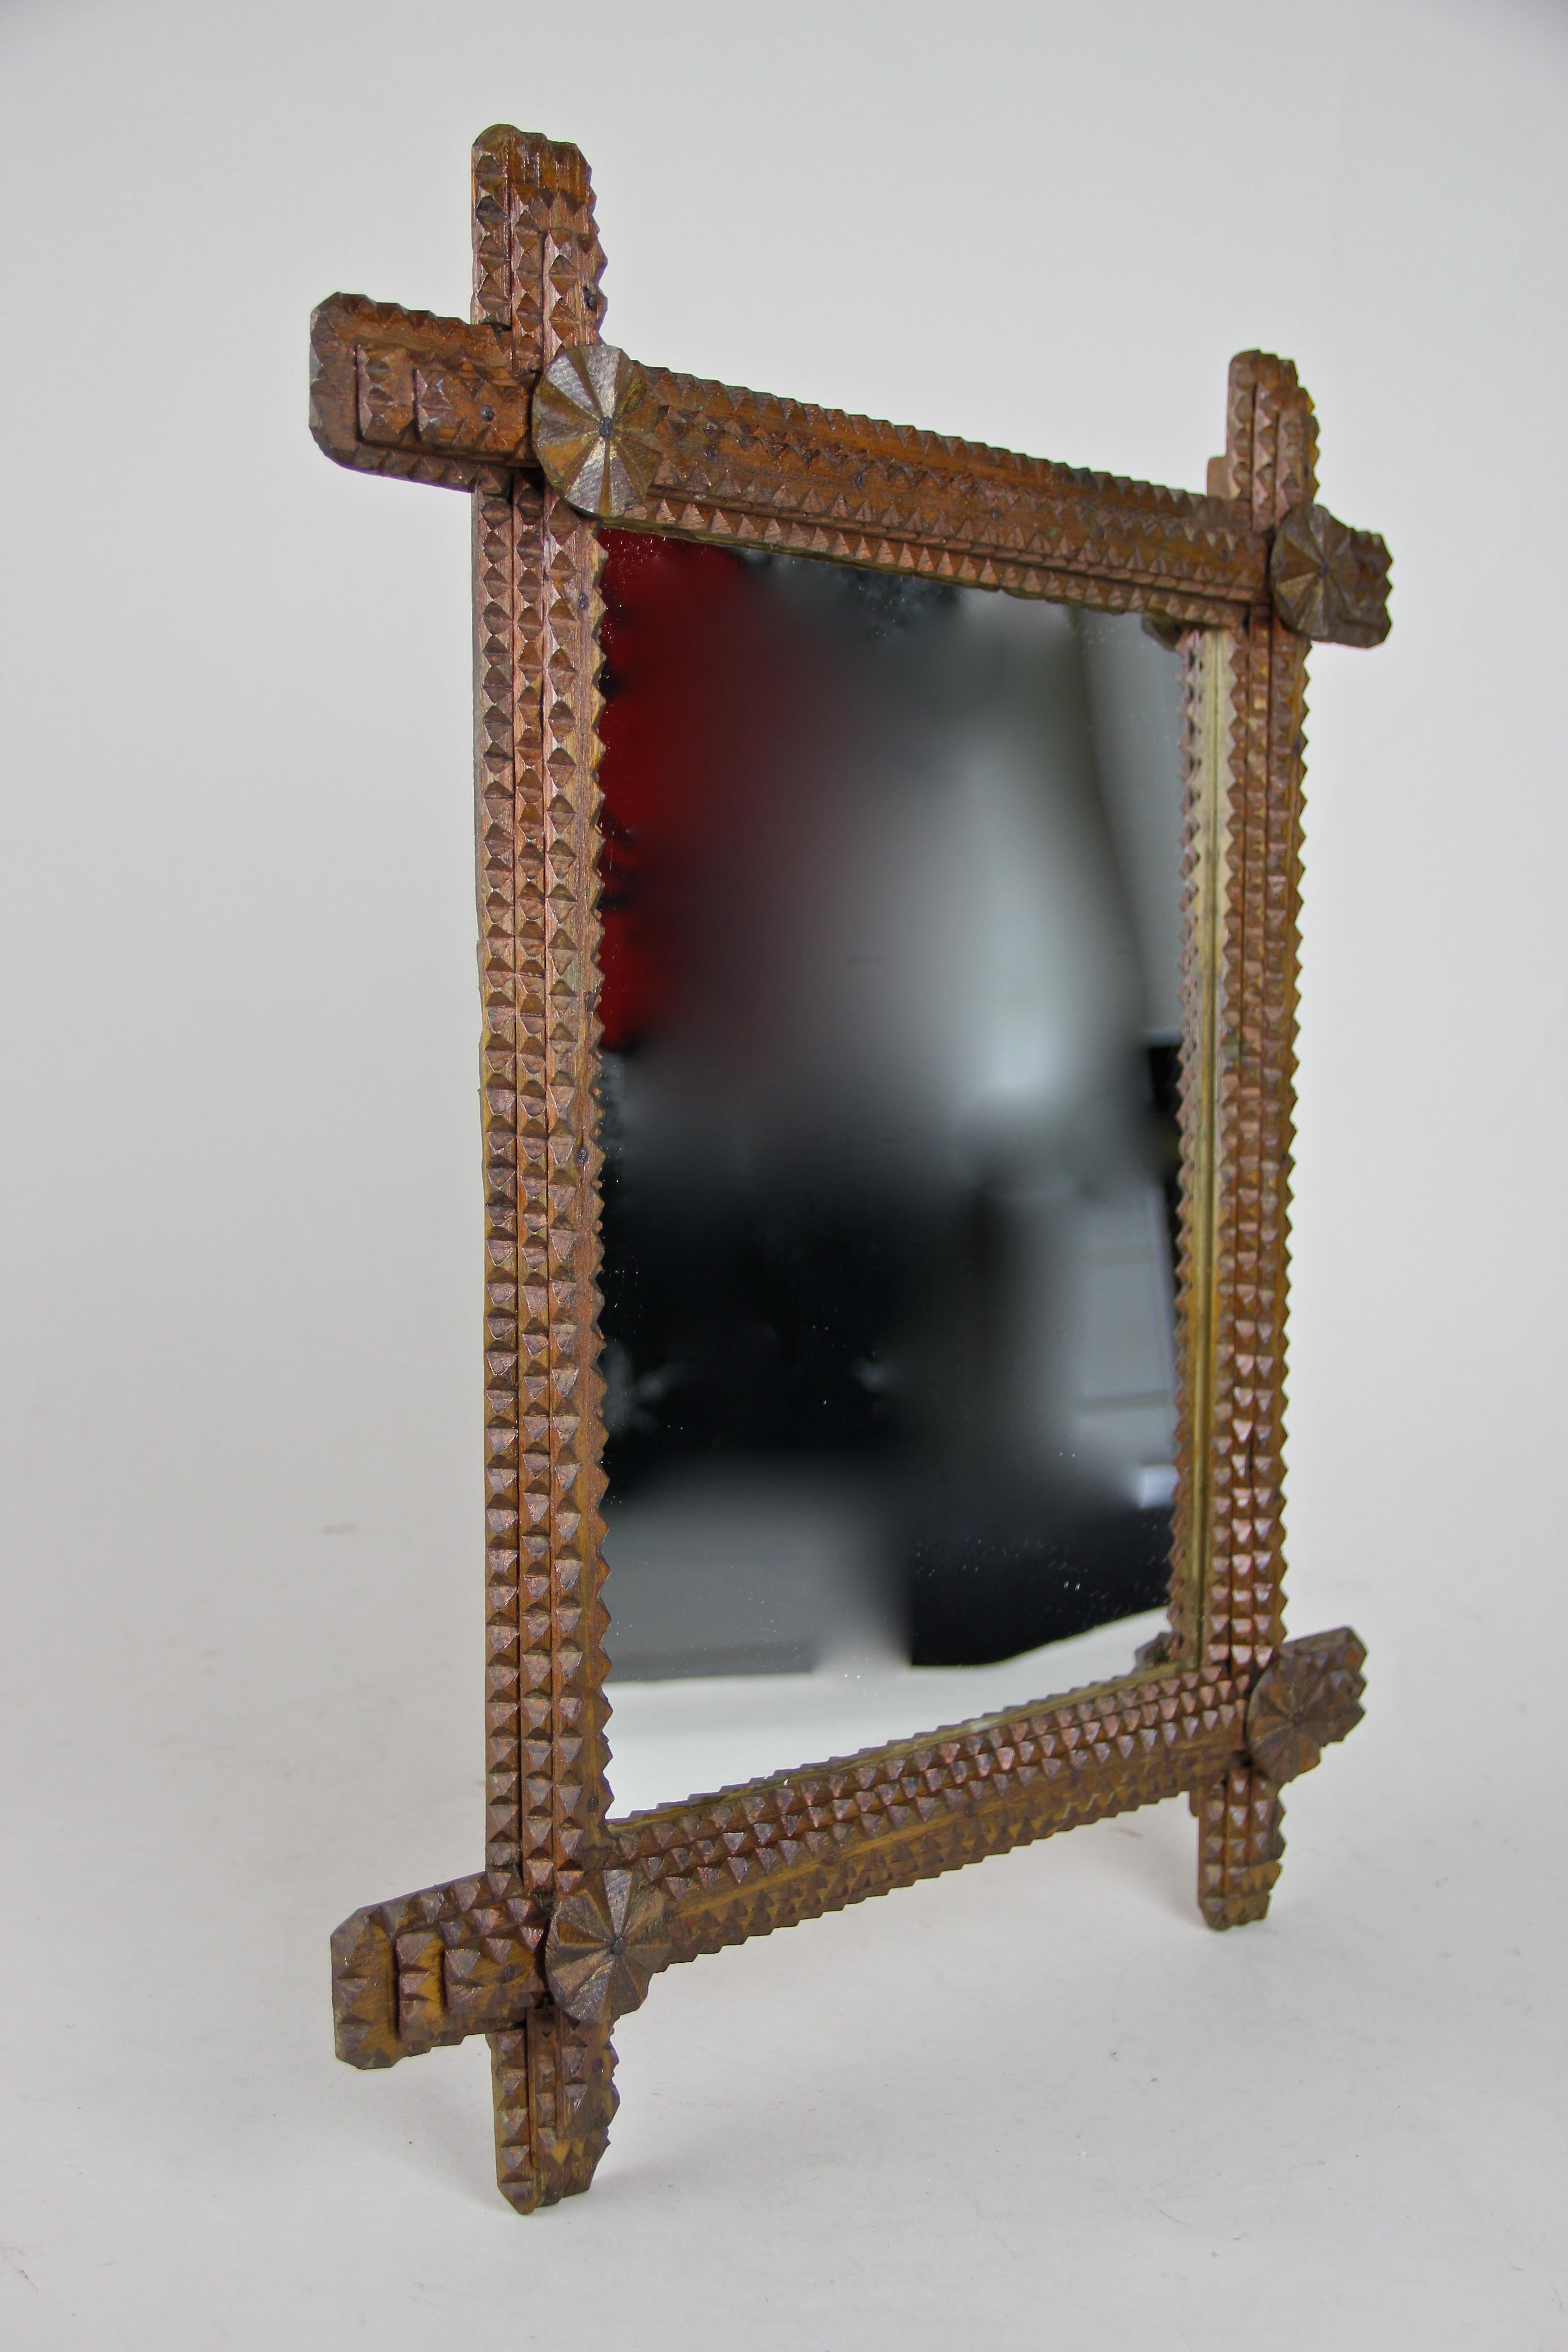 Delightful wooden Tramp Art wall mirror from circa 1870 in Austria. This late 19th century hand carved mirror comes with a lovely rustic design adorned by round wooden applications in the corners, looking like small wind turbines. A unique shape